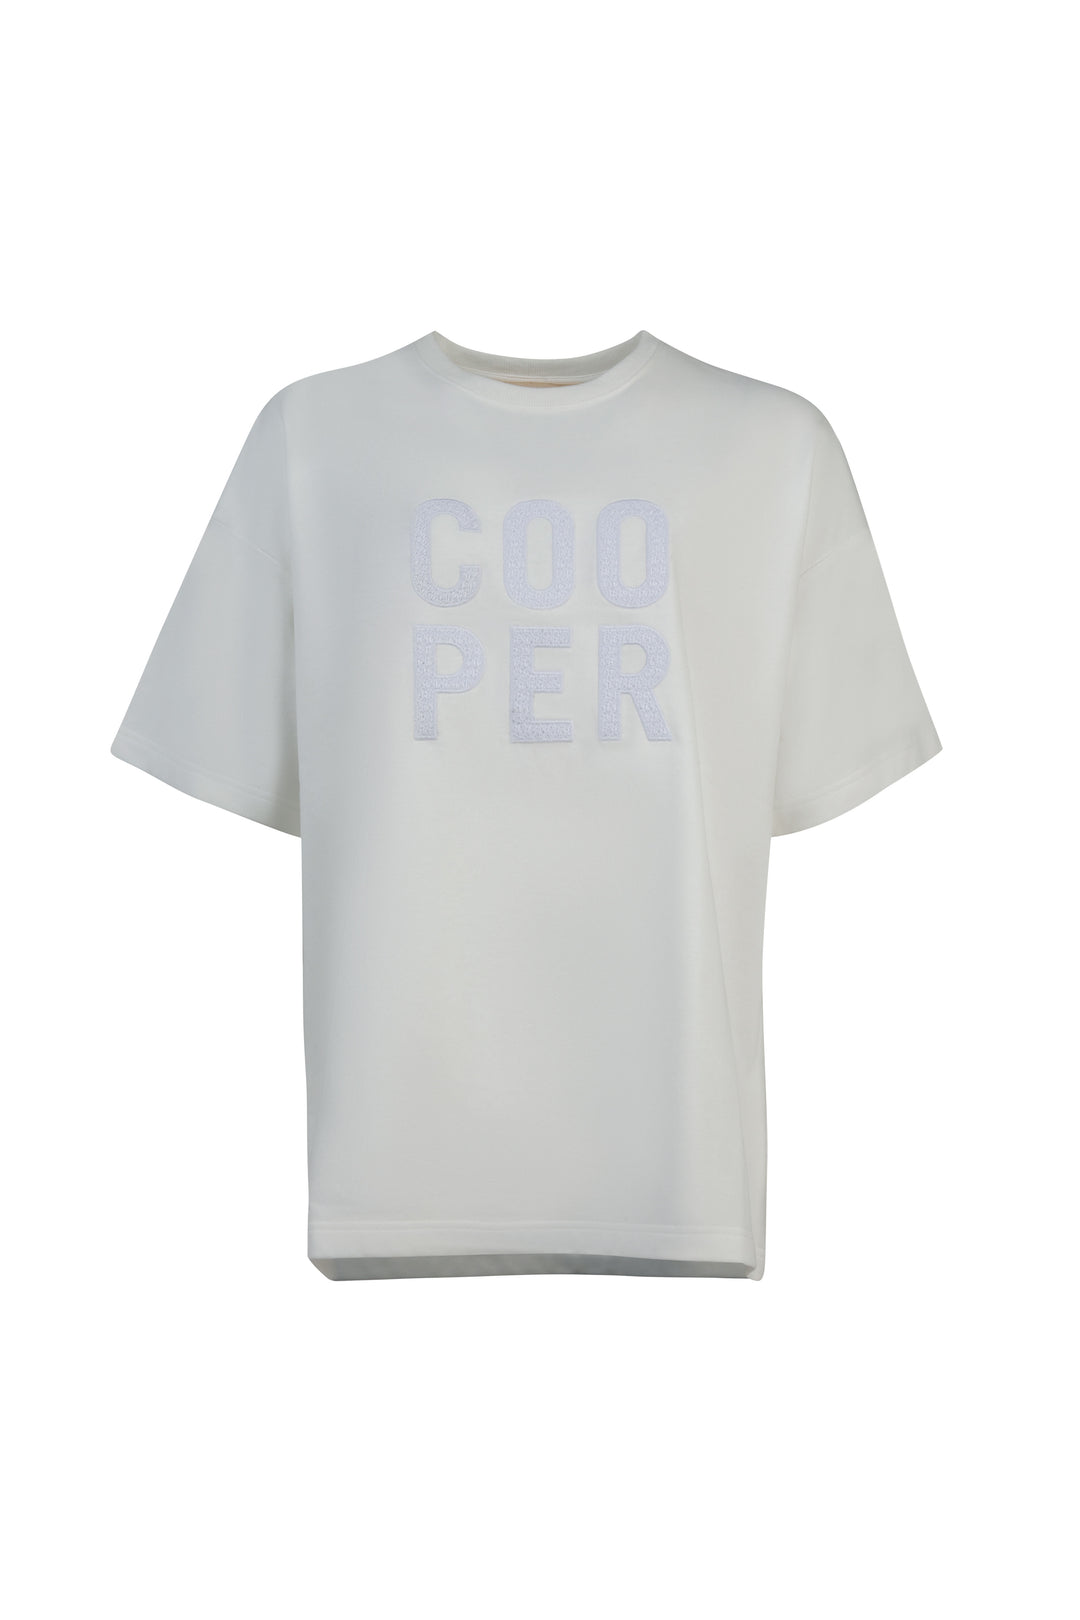 CASUALLY COOPER T-shirt (White)